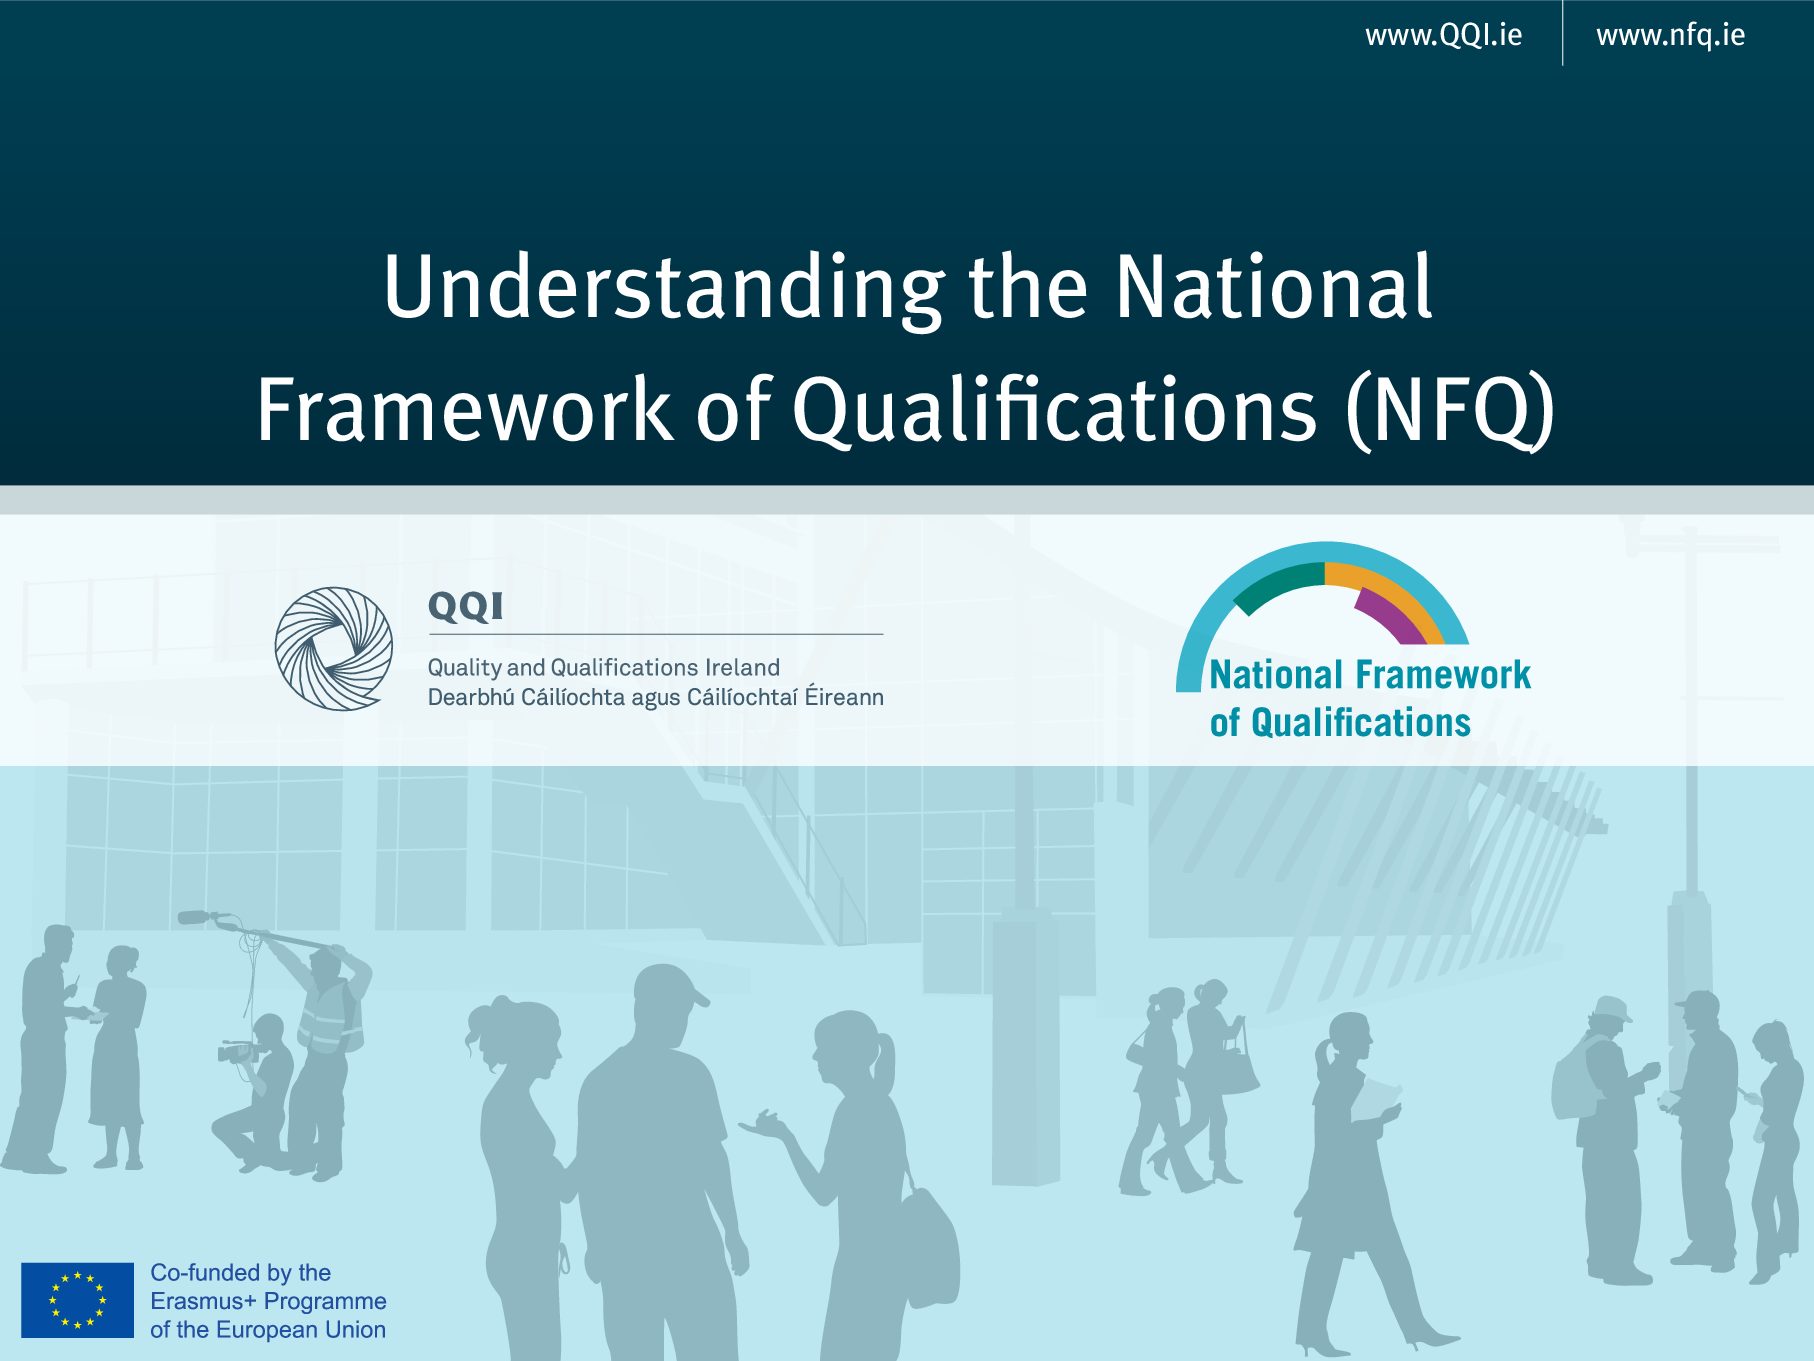 The National Framework of Qualifications (NFQ) explained